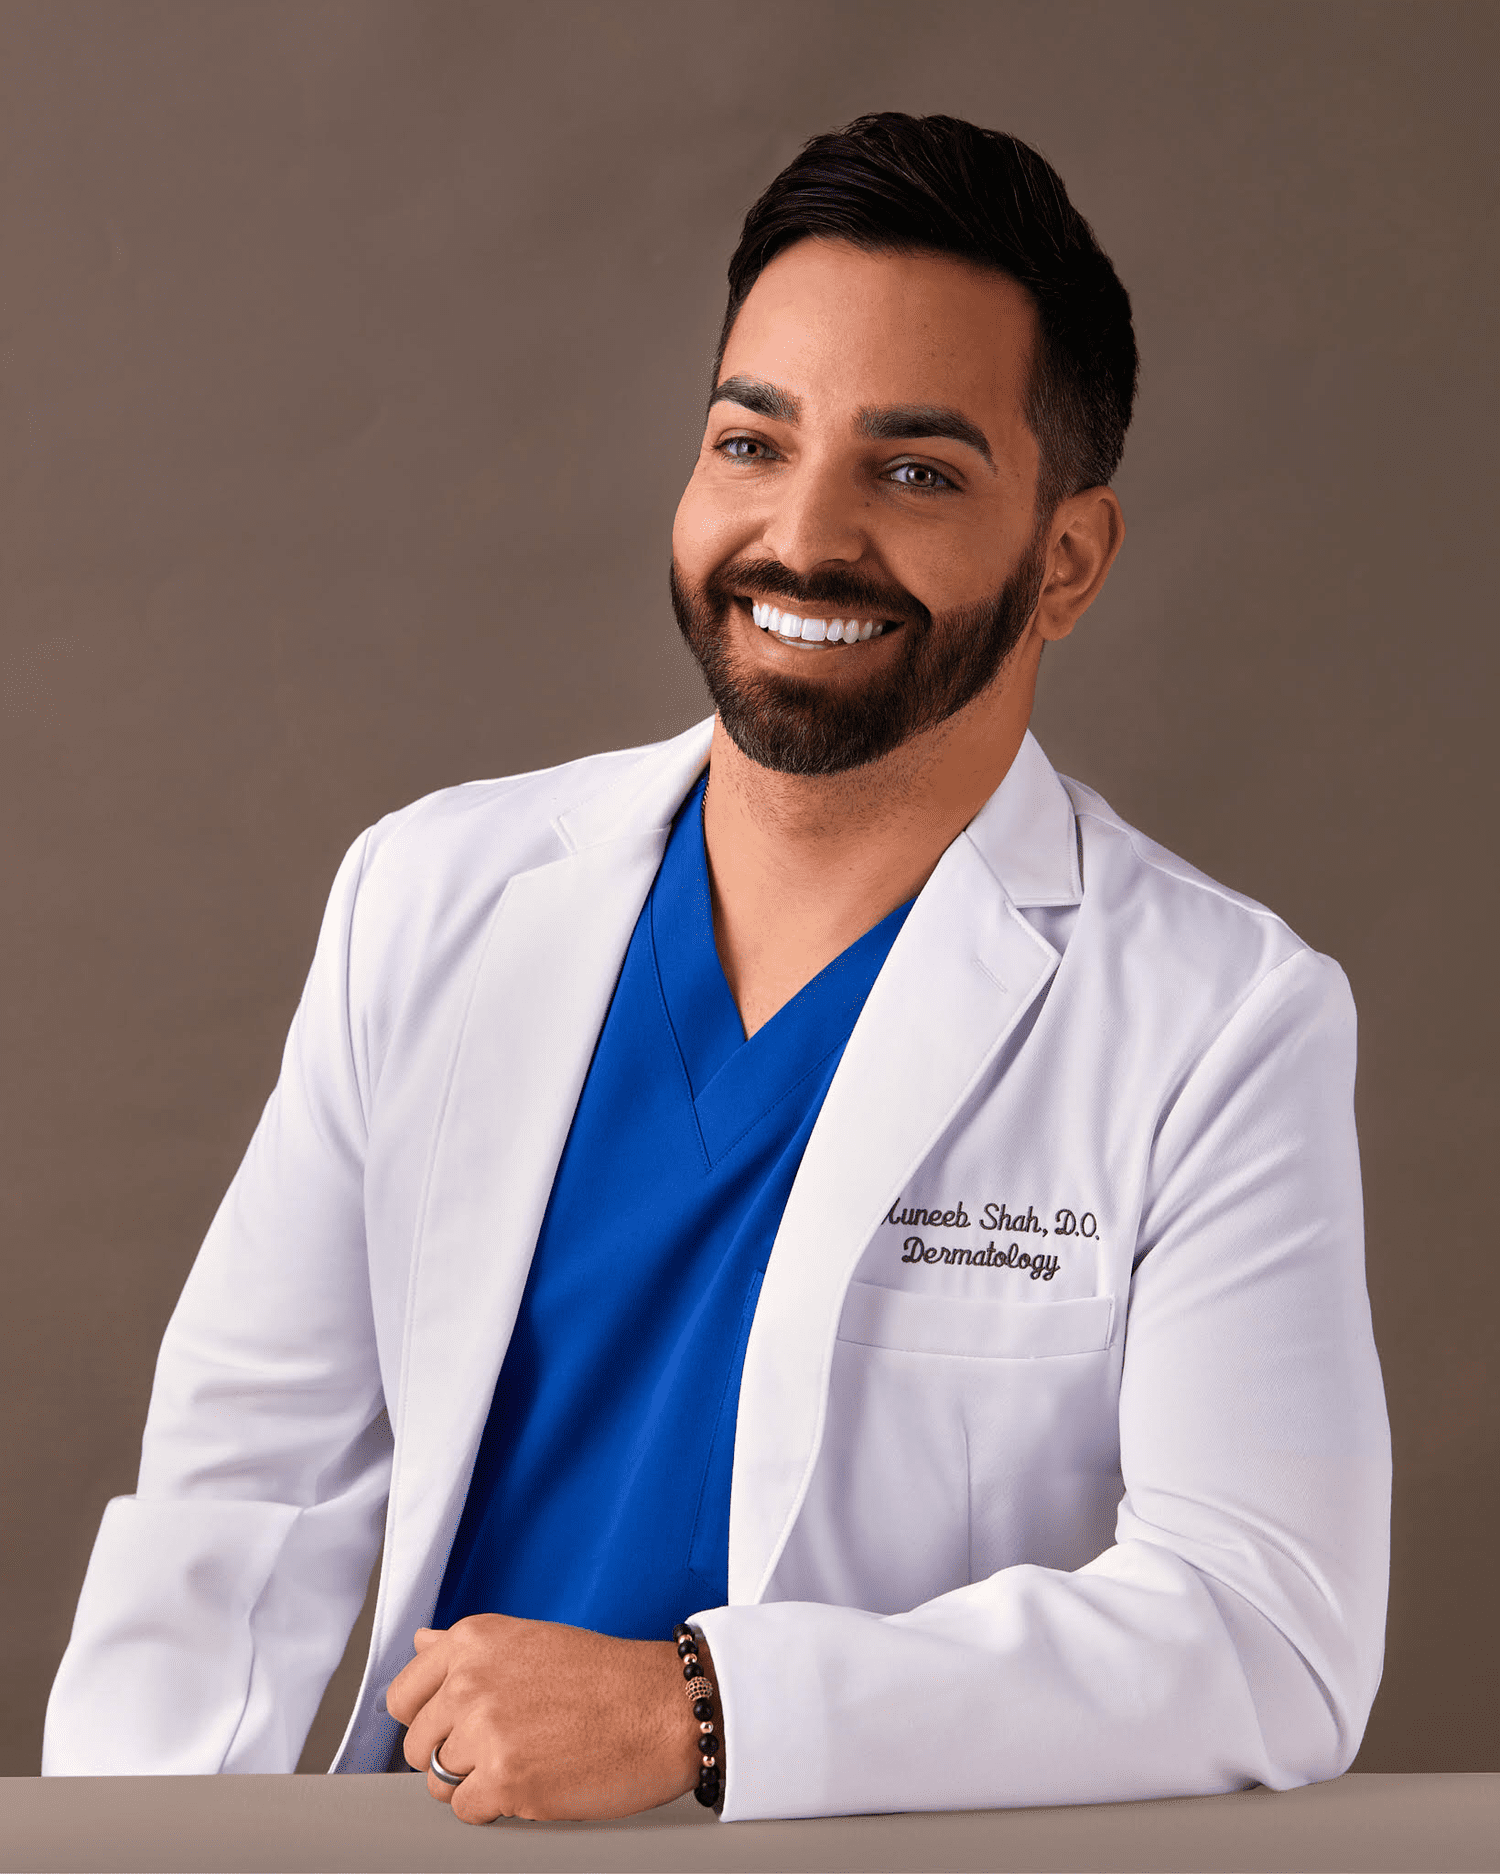 <div>TikTok's DermDoctor Shares What Online Skin Care Advice to Steer Clear Of</div>